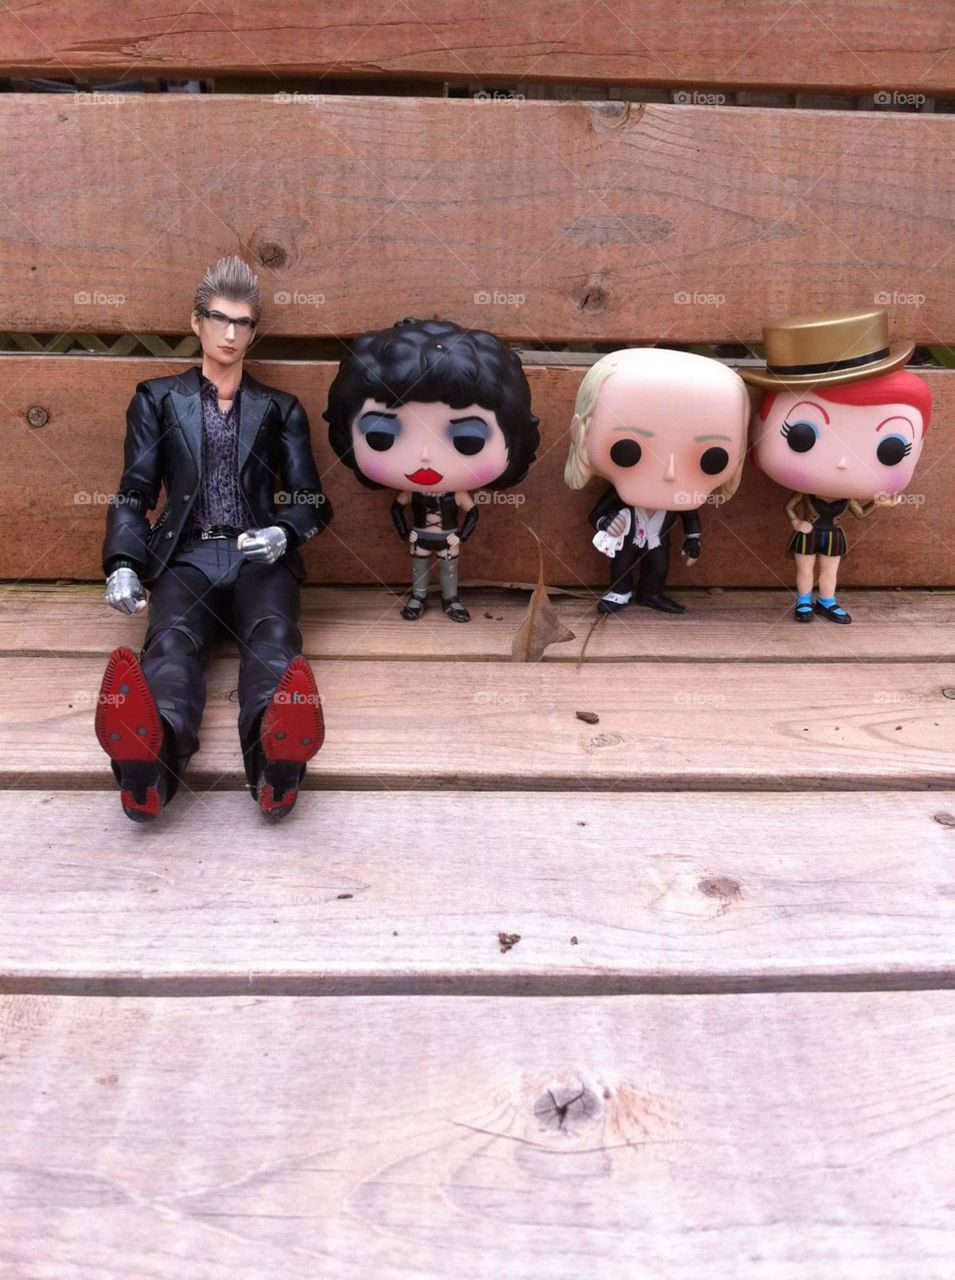 Final Fantasy 15 Ignis with some pop funko Rocky horror figures.